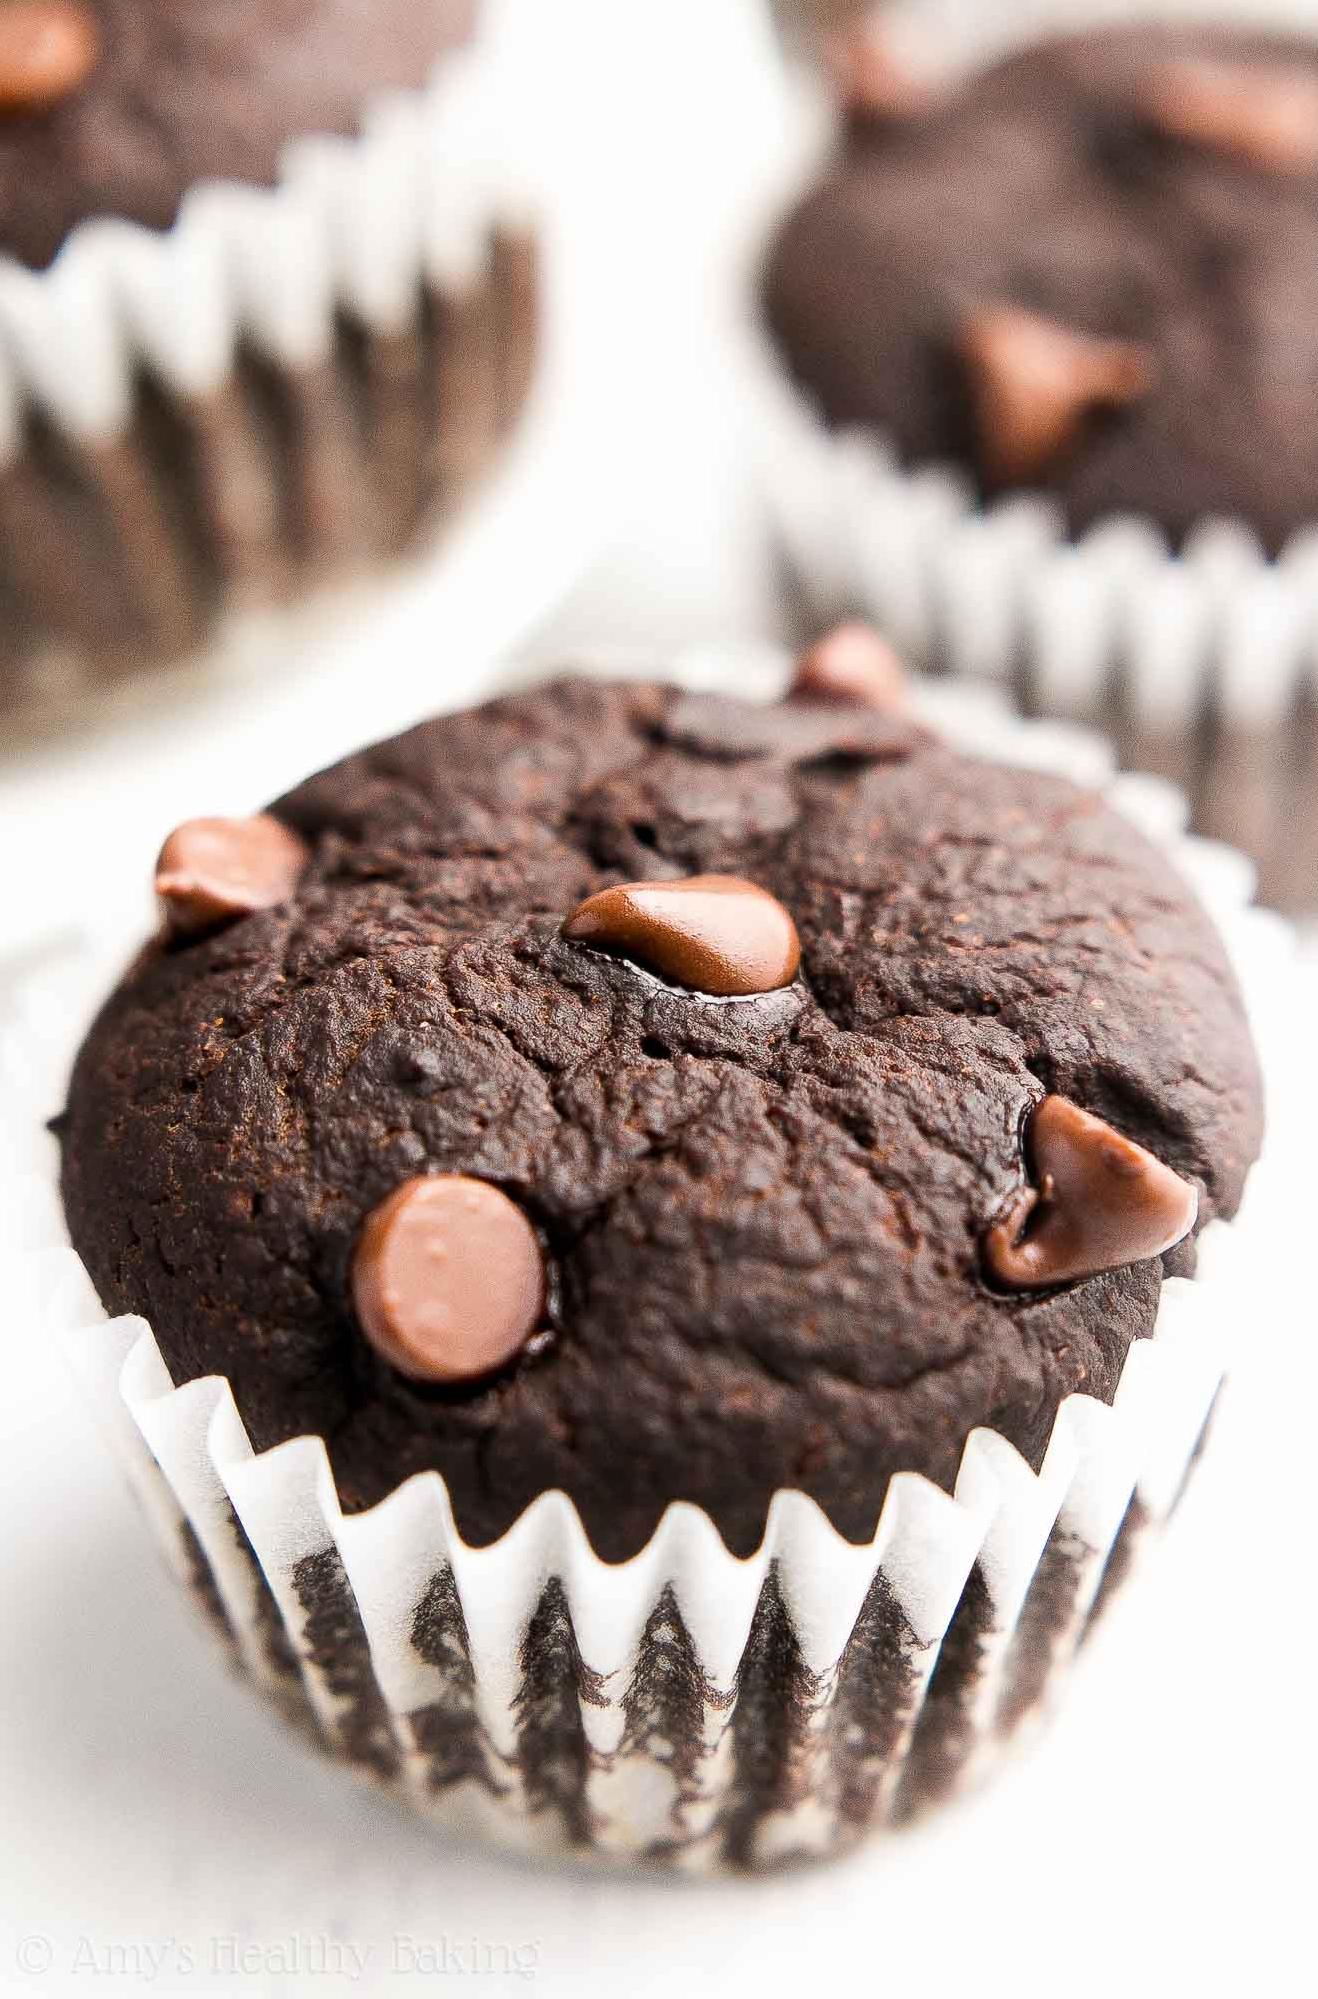 Enjoy the aroma of freshly brewed coffee and chocolate as you take these muffins out of the oven.